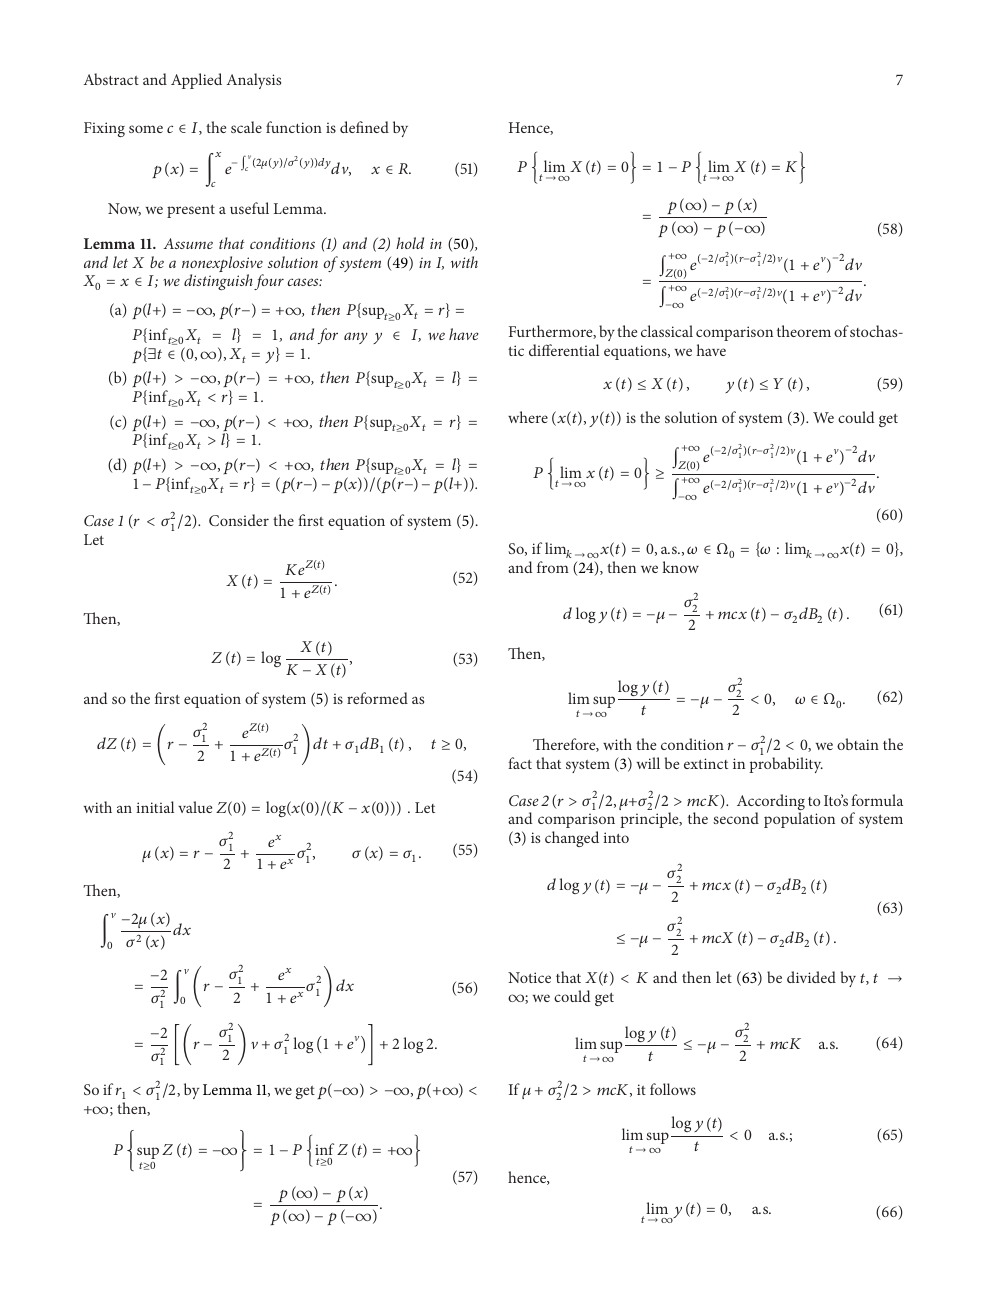 Boundary Stabilization Of A Semilinear Wave Equation With Variable Coefficients Under The Time Varying And Nonlinear Feedback Topic Of Research Paper In Mathematics Download Scholarly Article Pdf And Read For Free On